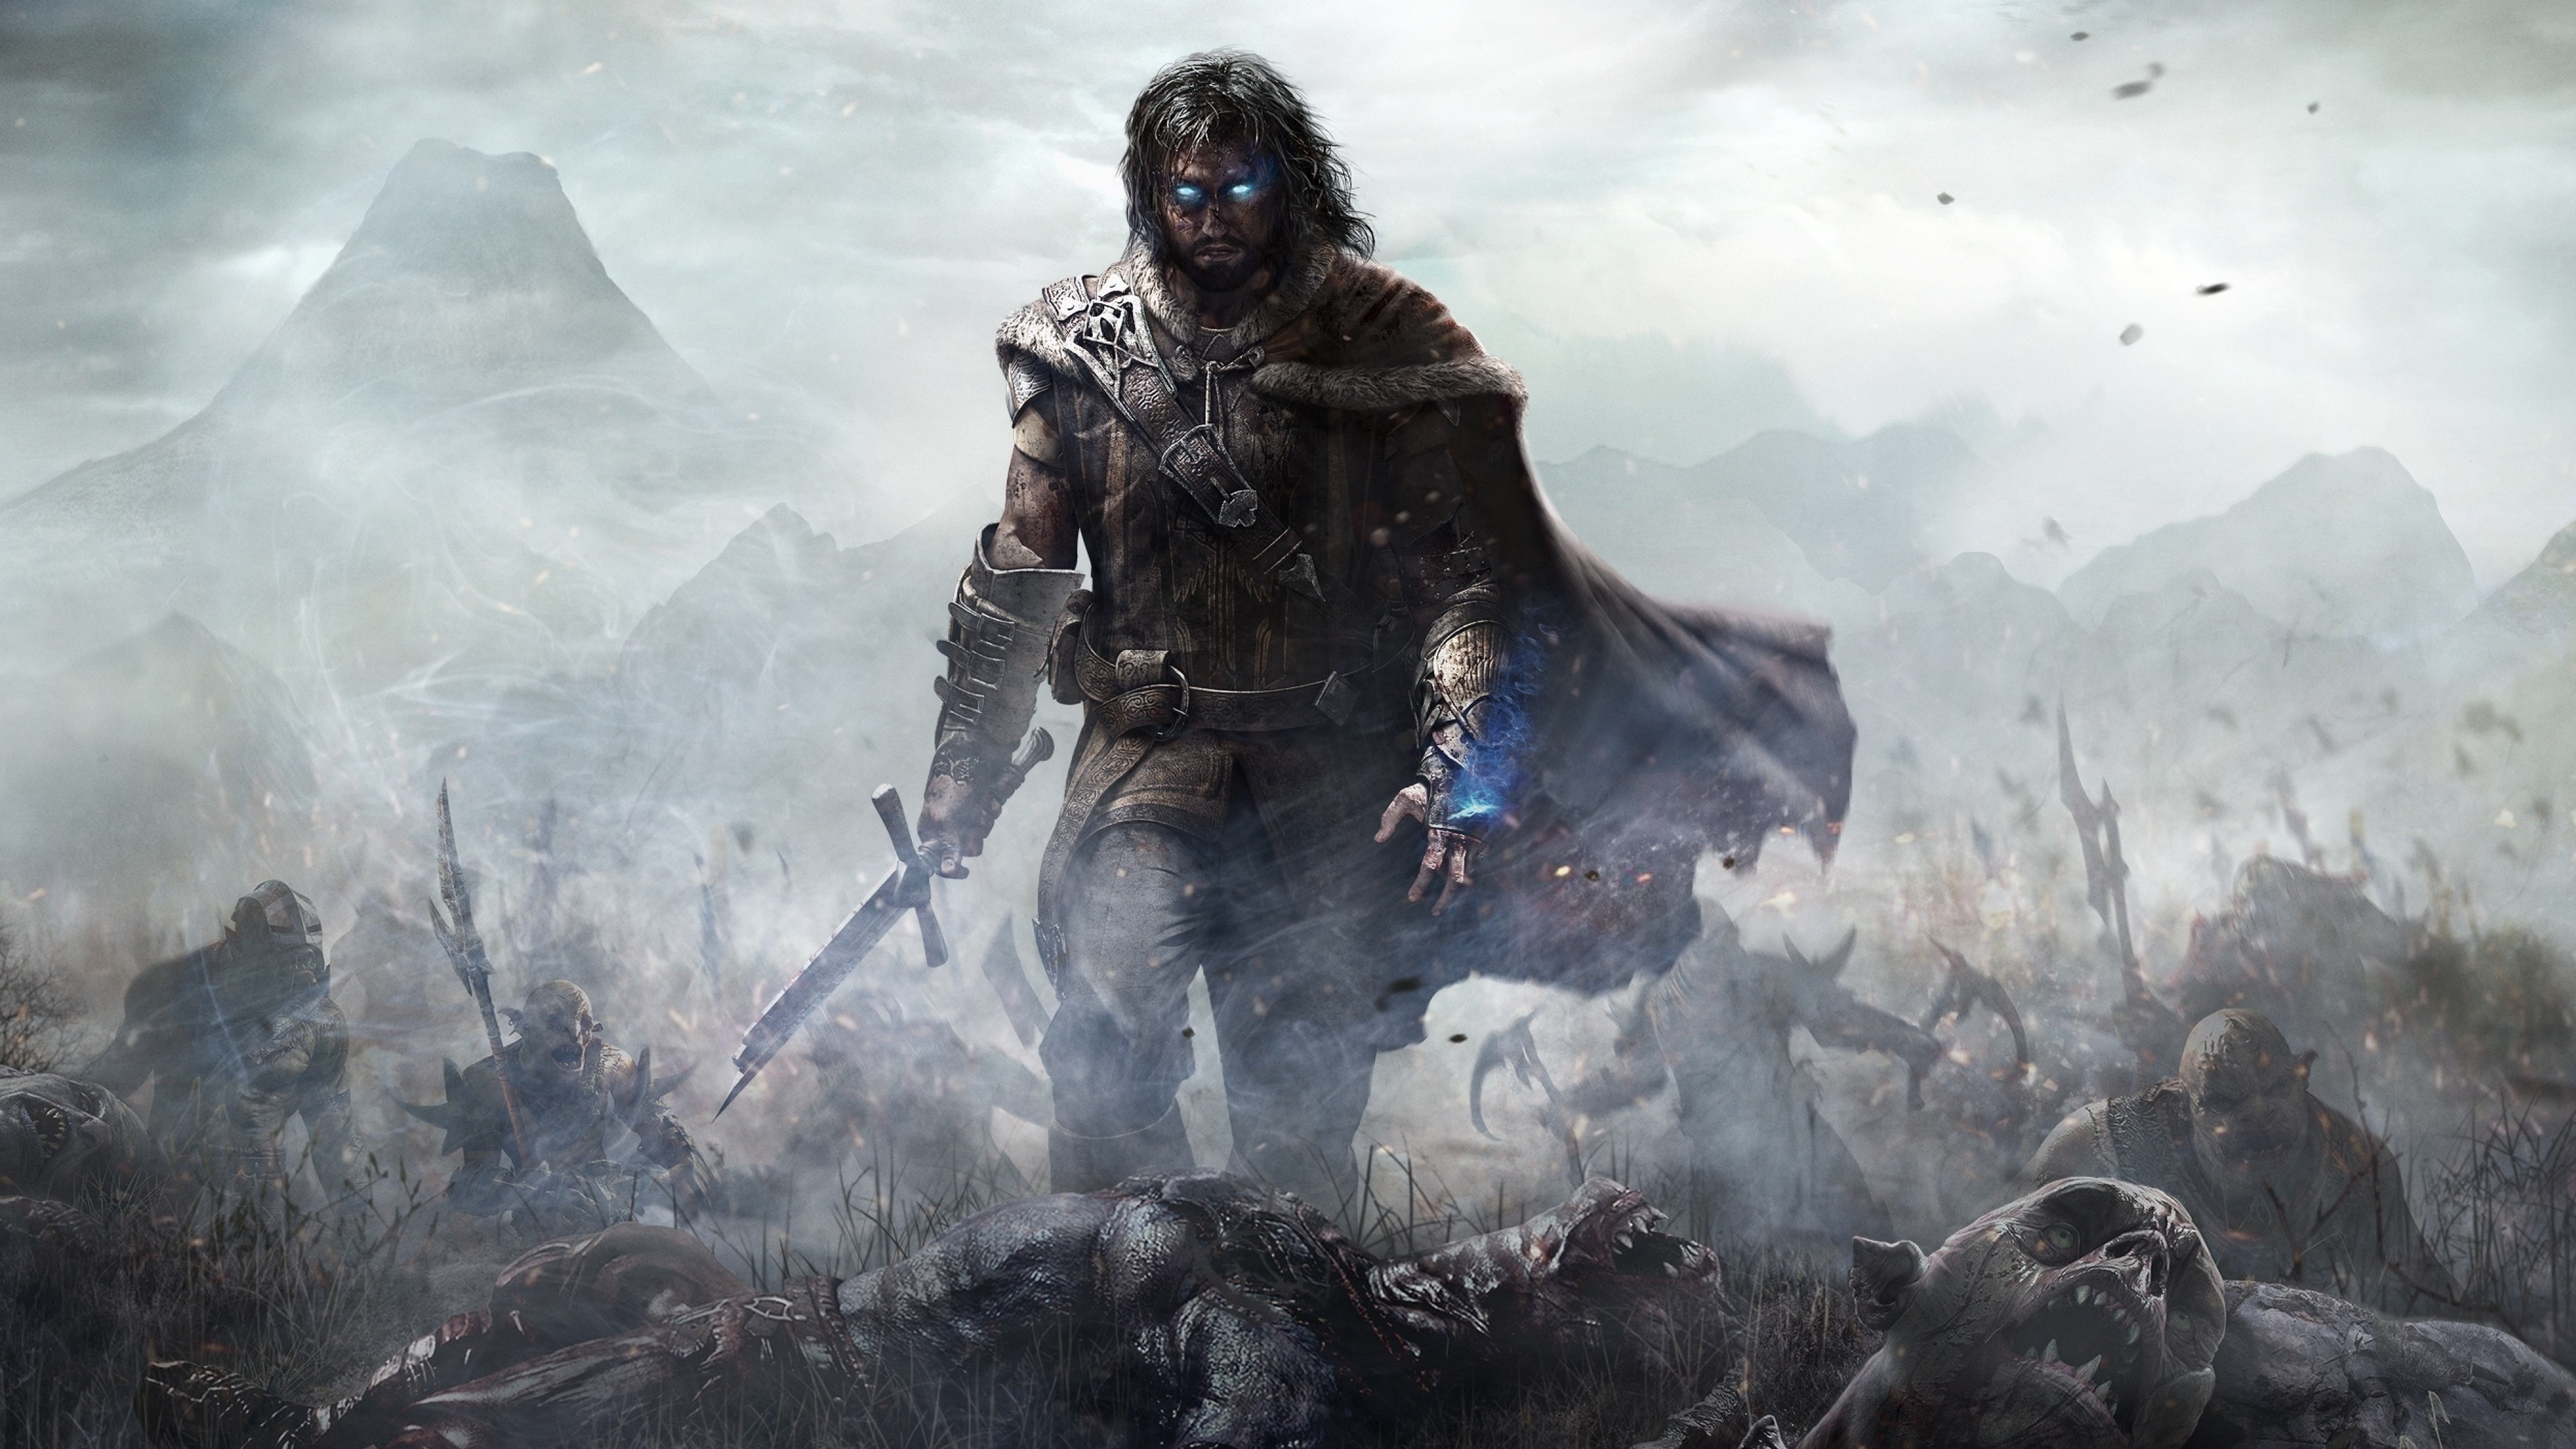 4k shadow of mordor images